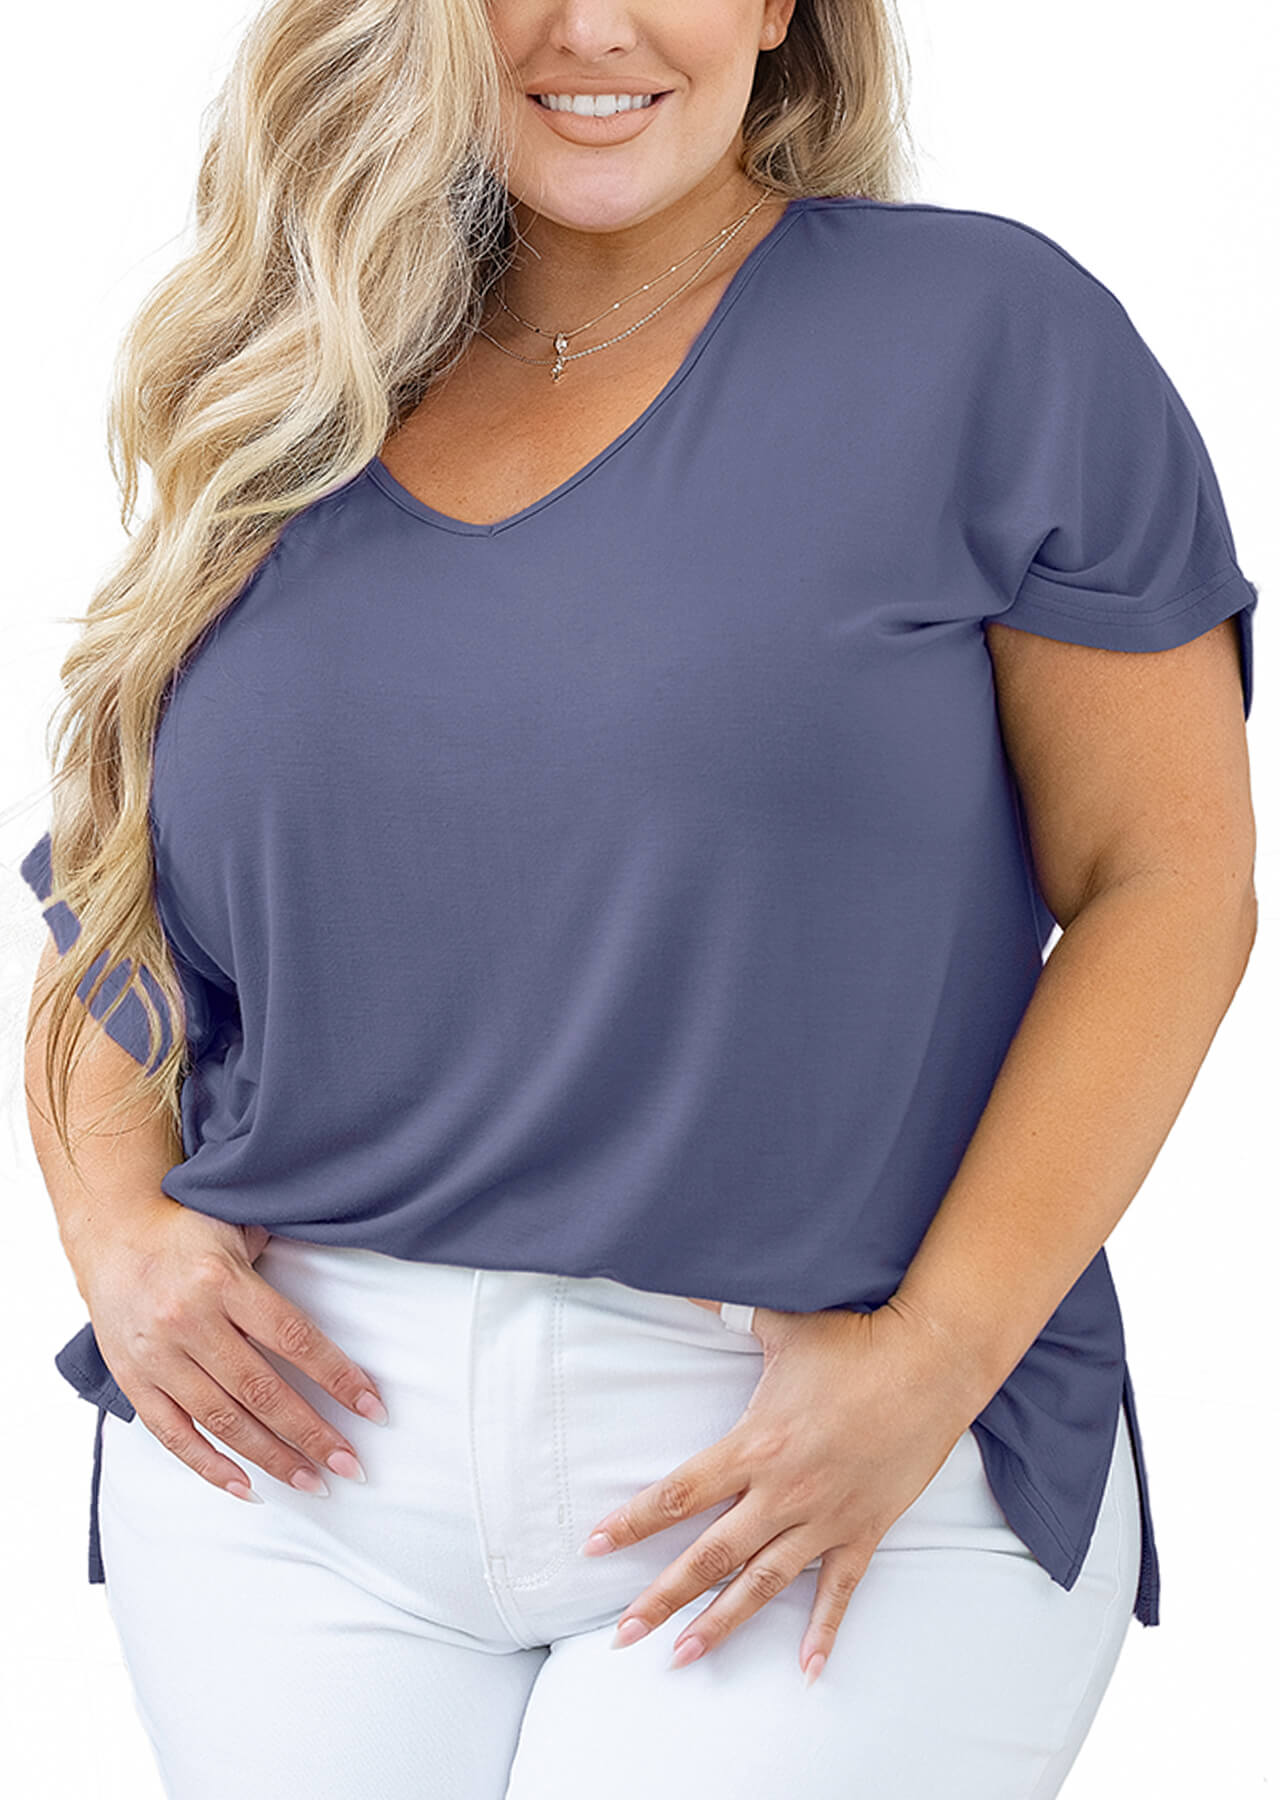 AusLook Womens Plus Size Short Sleeve Tunic Tops Scoop Neck Clothes Flowy  Swing Babydoll Tops Basic Tee Shirts for Leggings : : Clothing